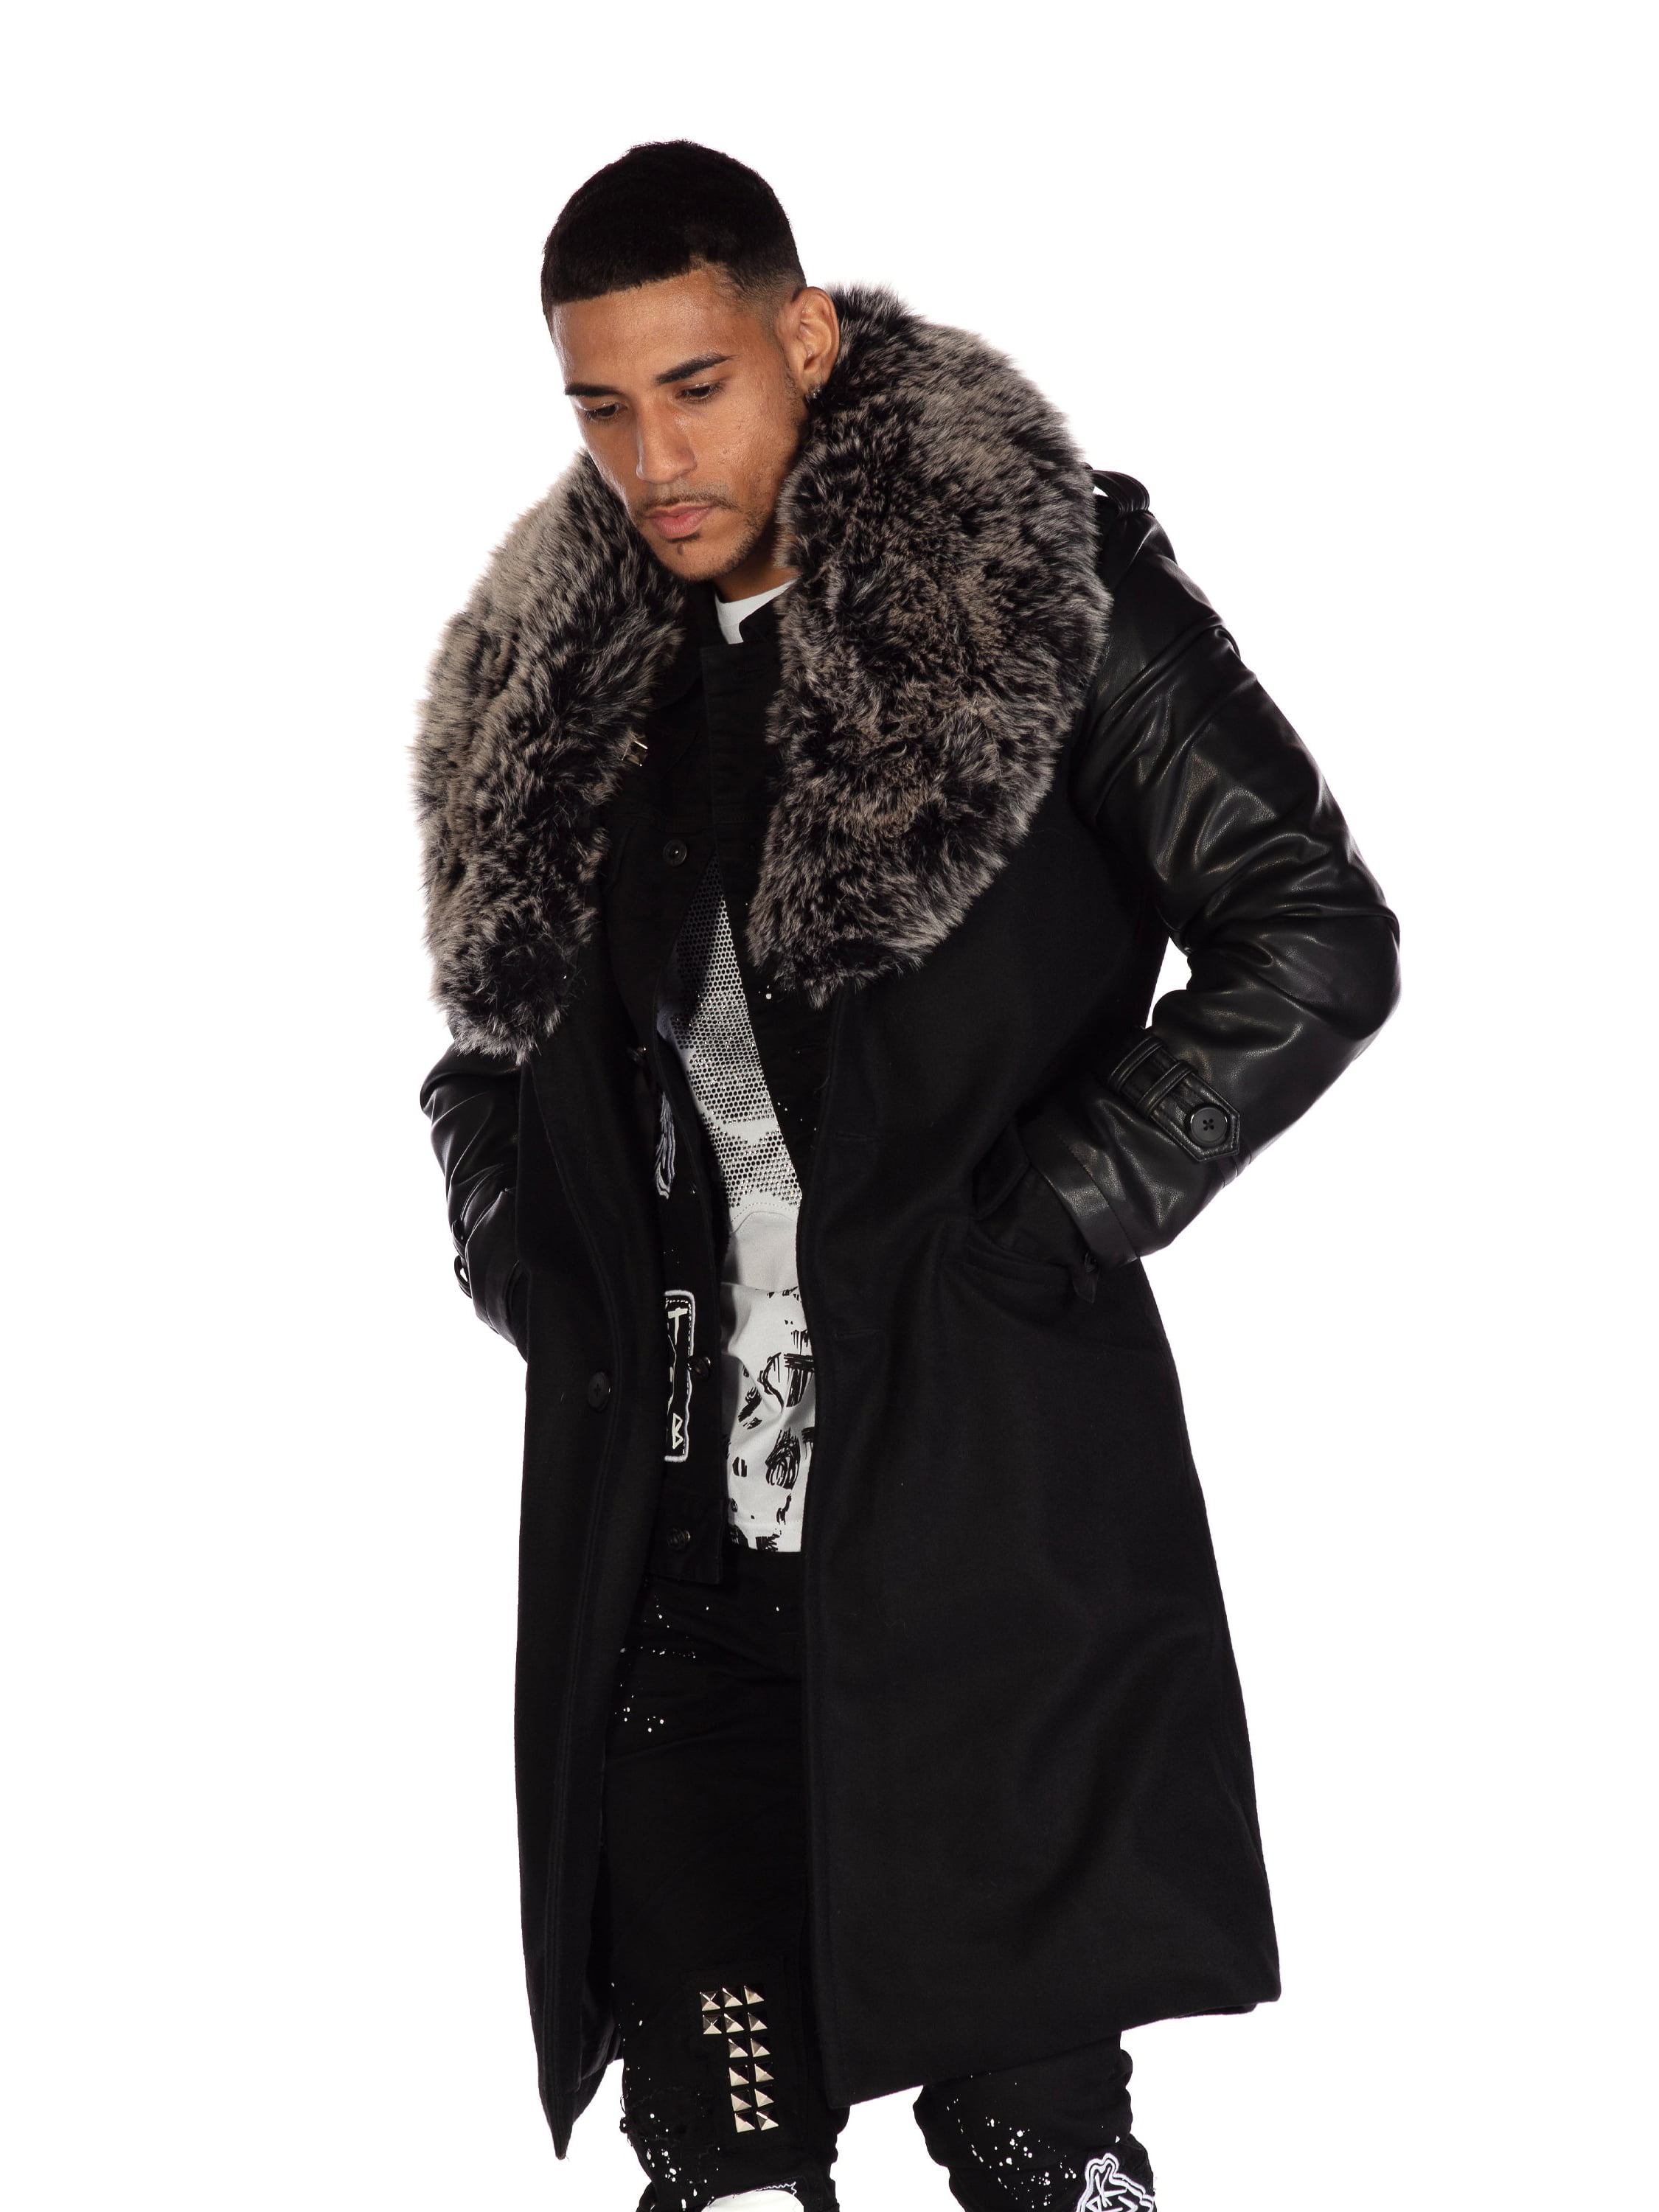 Smoke Rise Men’s Wool Coat with Removable Faux Fur Collar Black